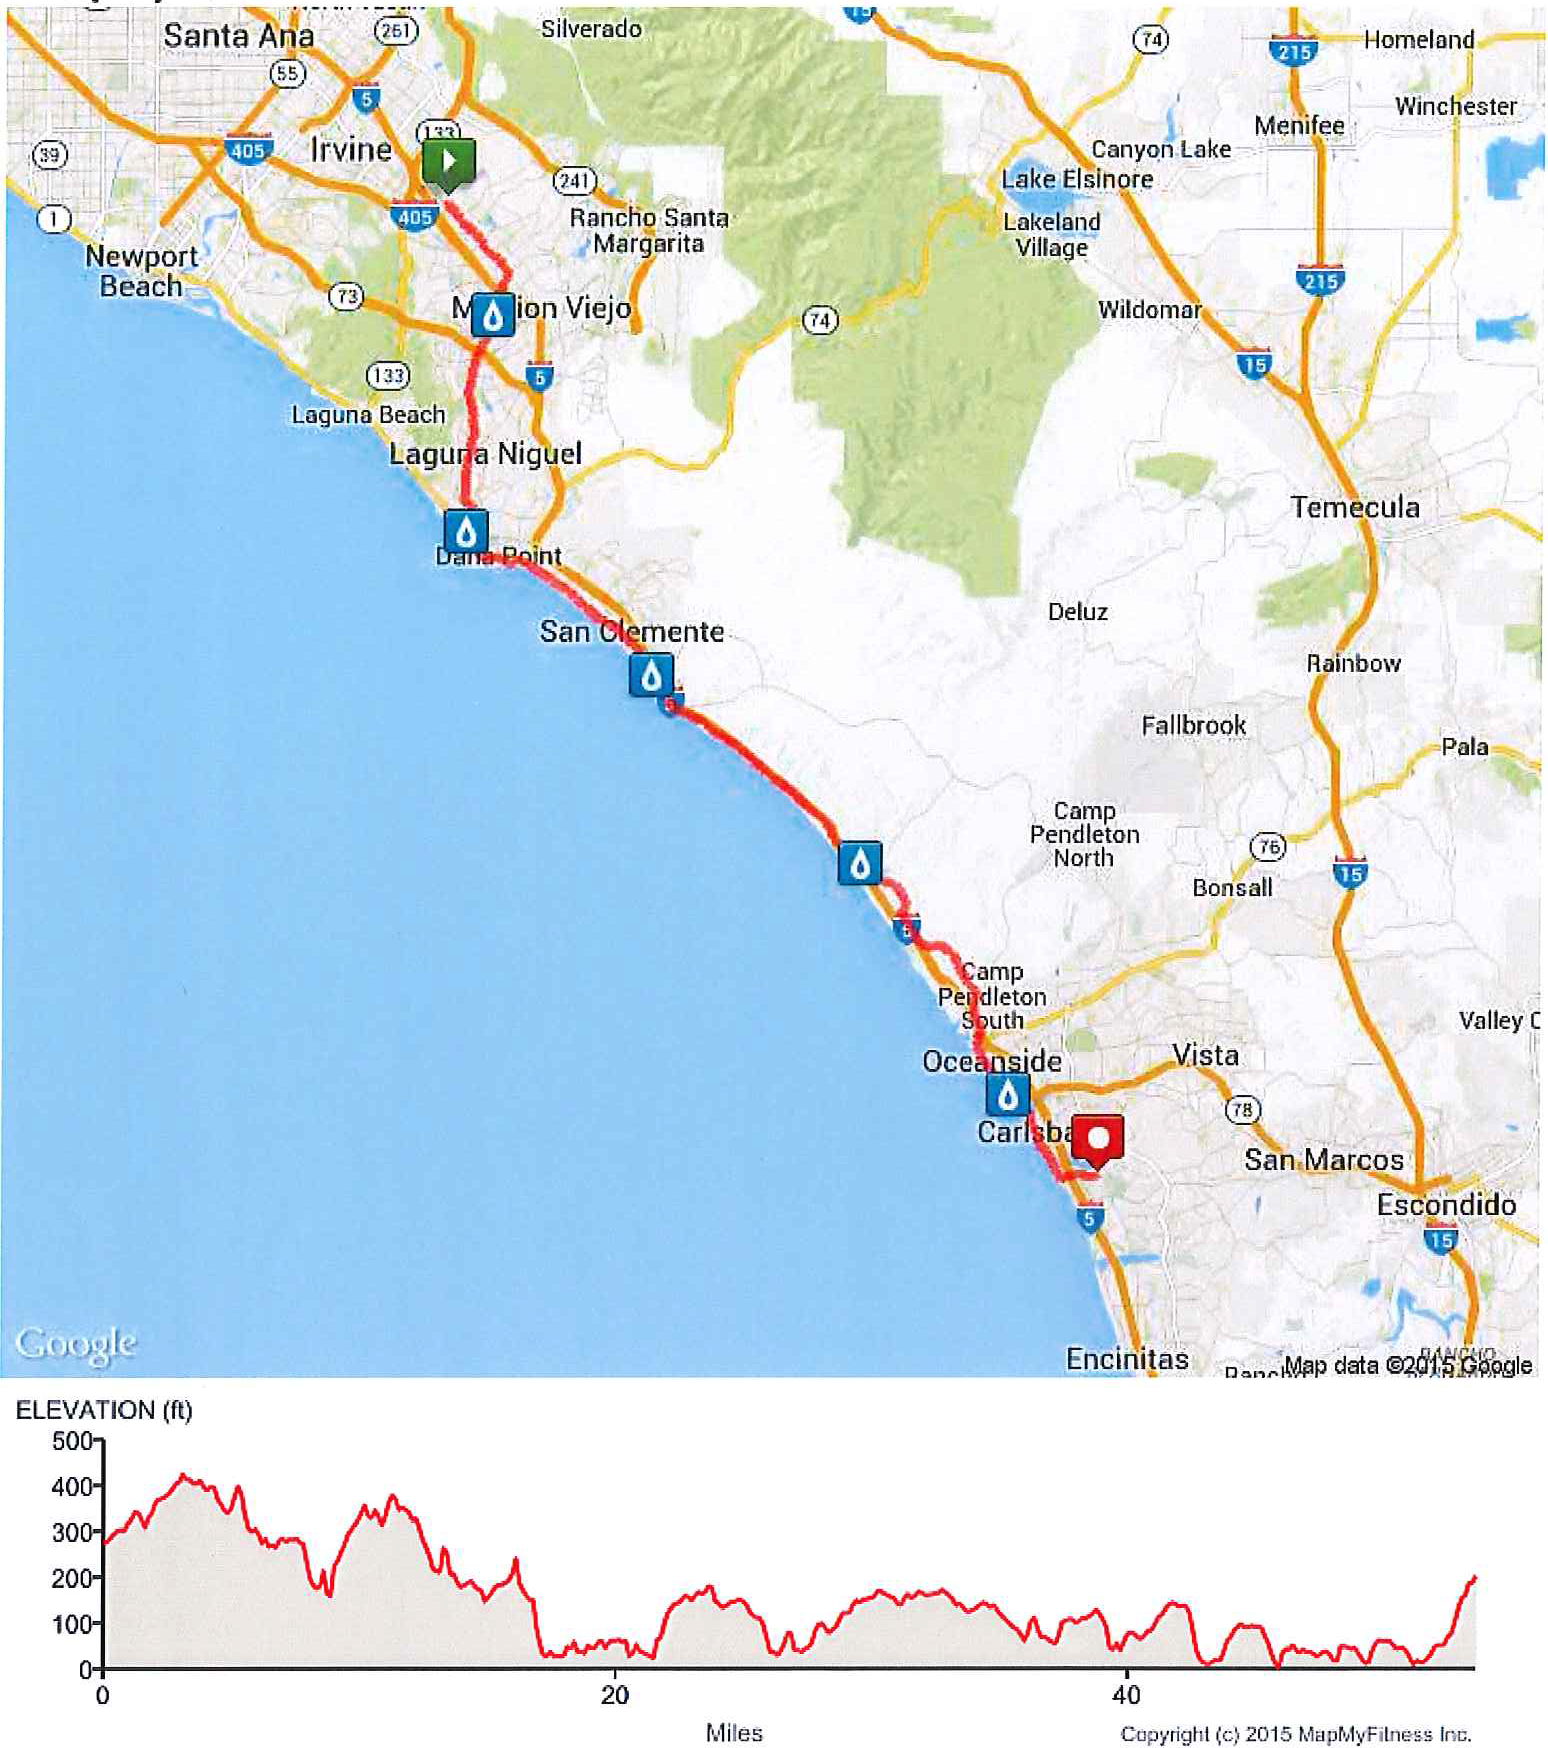 Day 1 50-Mile Route Map and Elevation Profile